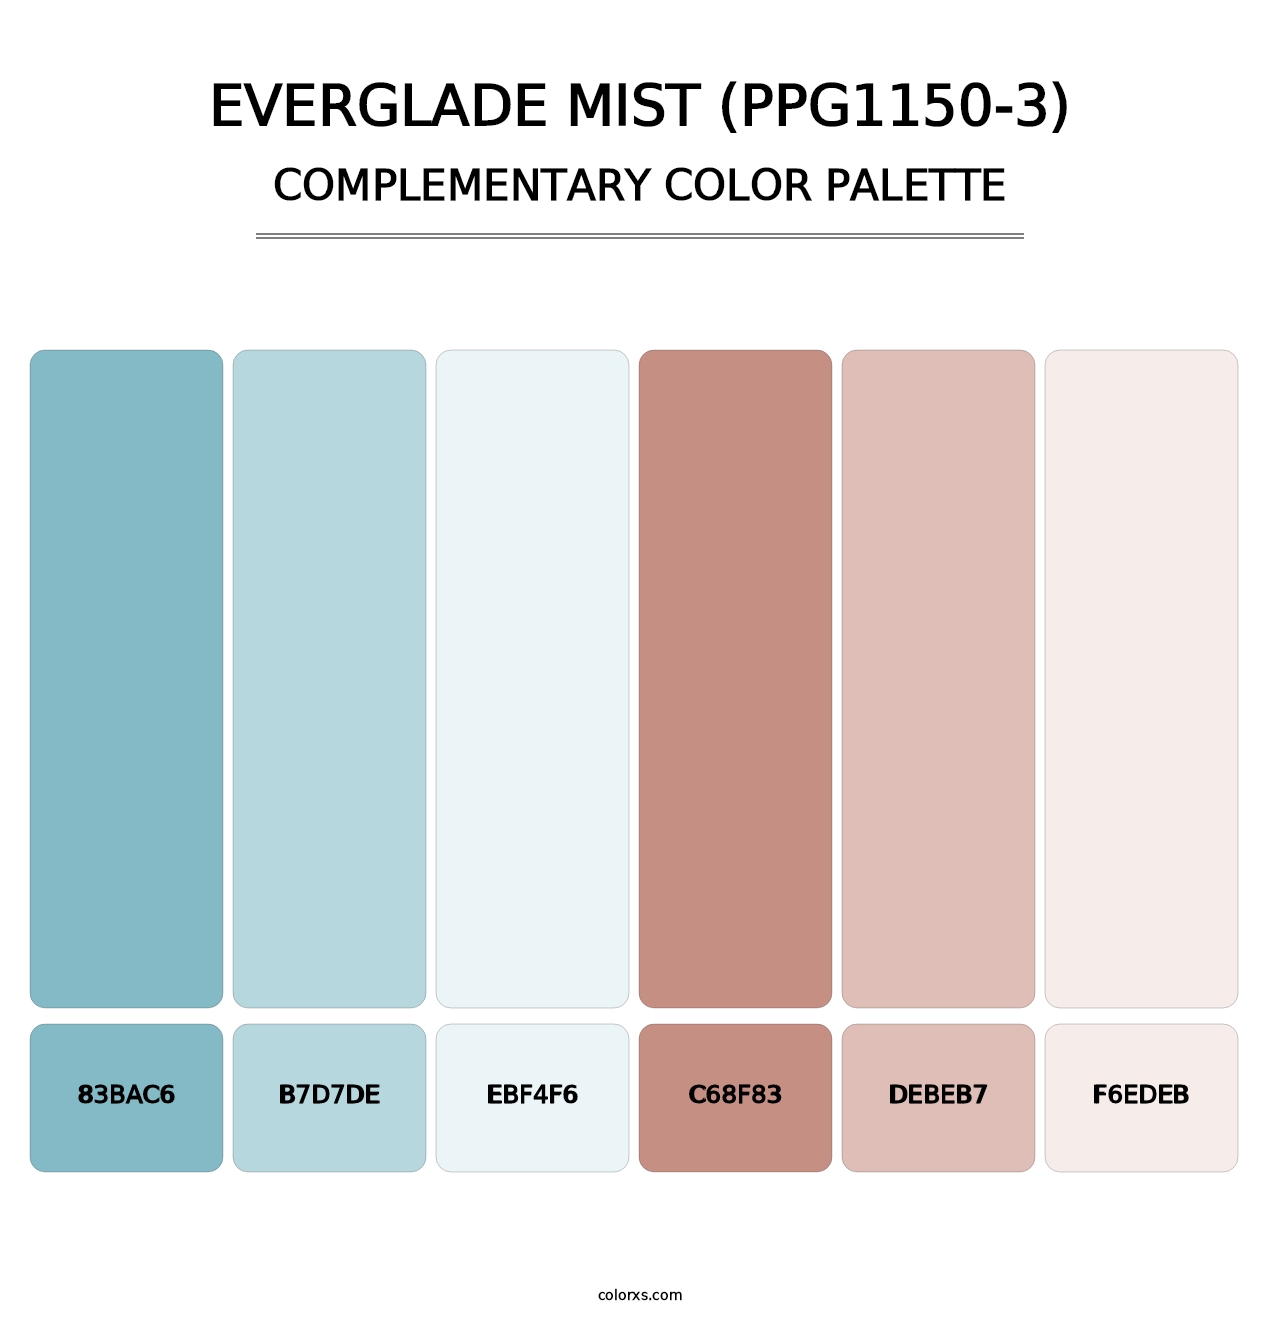 Everglade Mist (PPG1150-3) - Complementary Color Palette